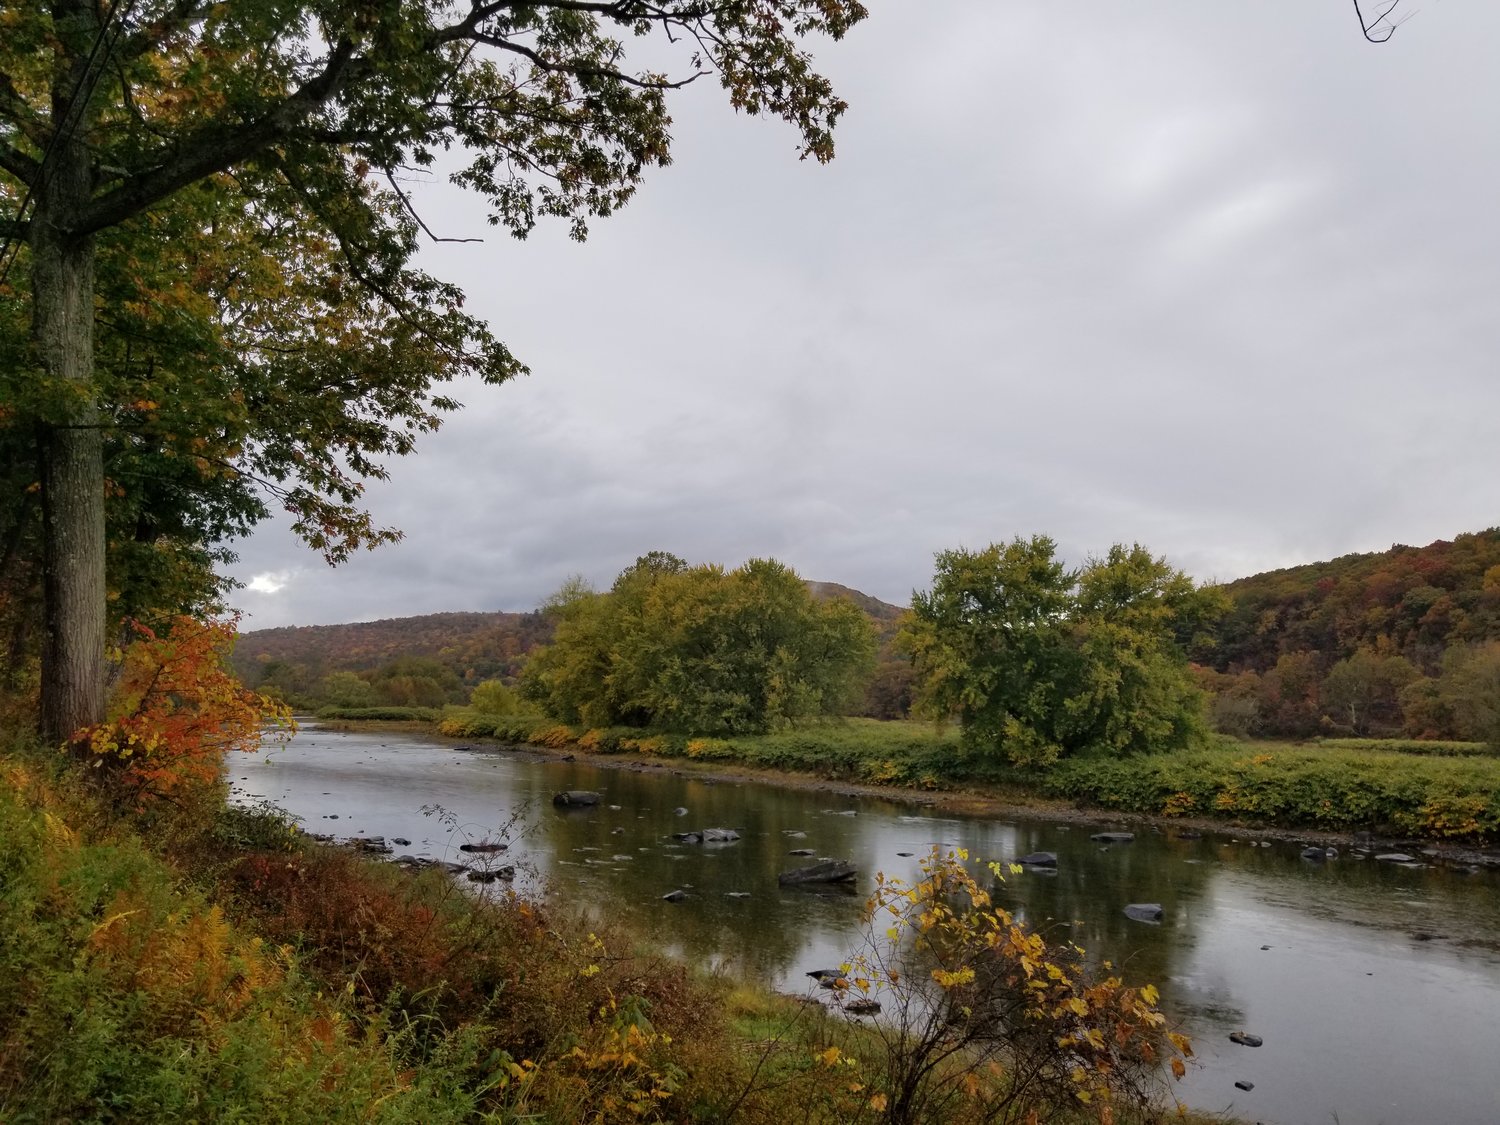 Autumn on the Delaware at Callicoon. Looming clouds promise a storm.